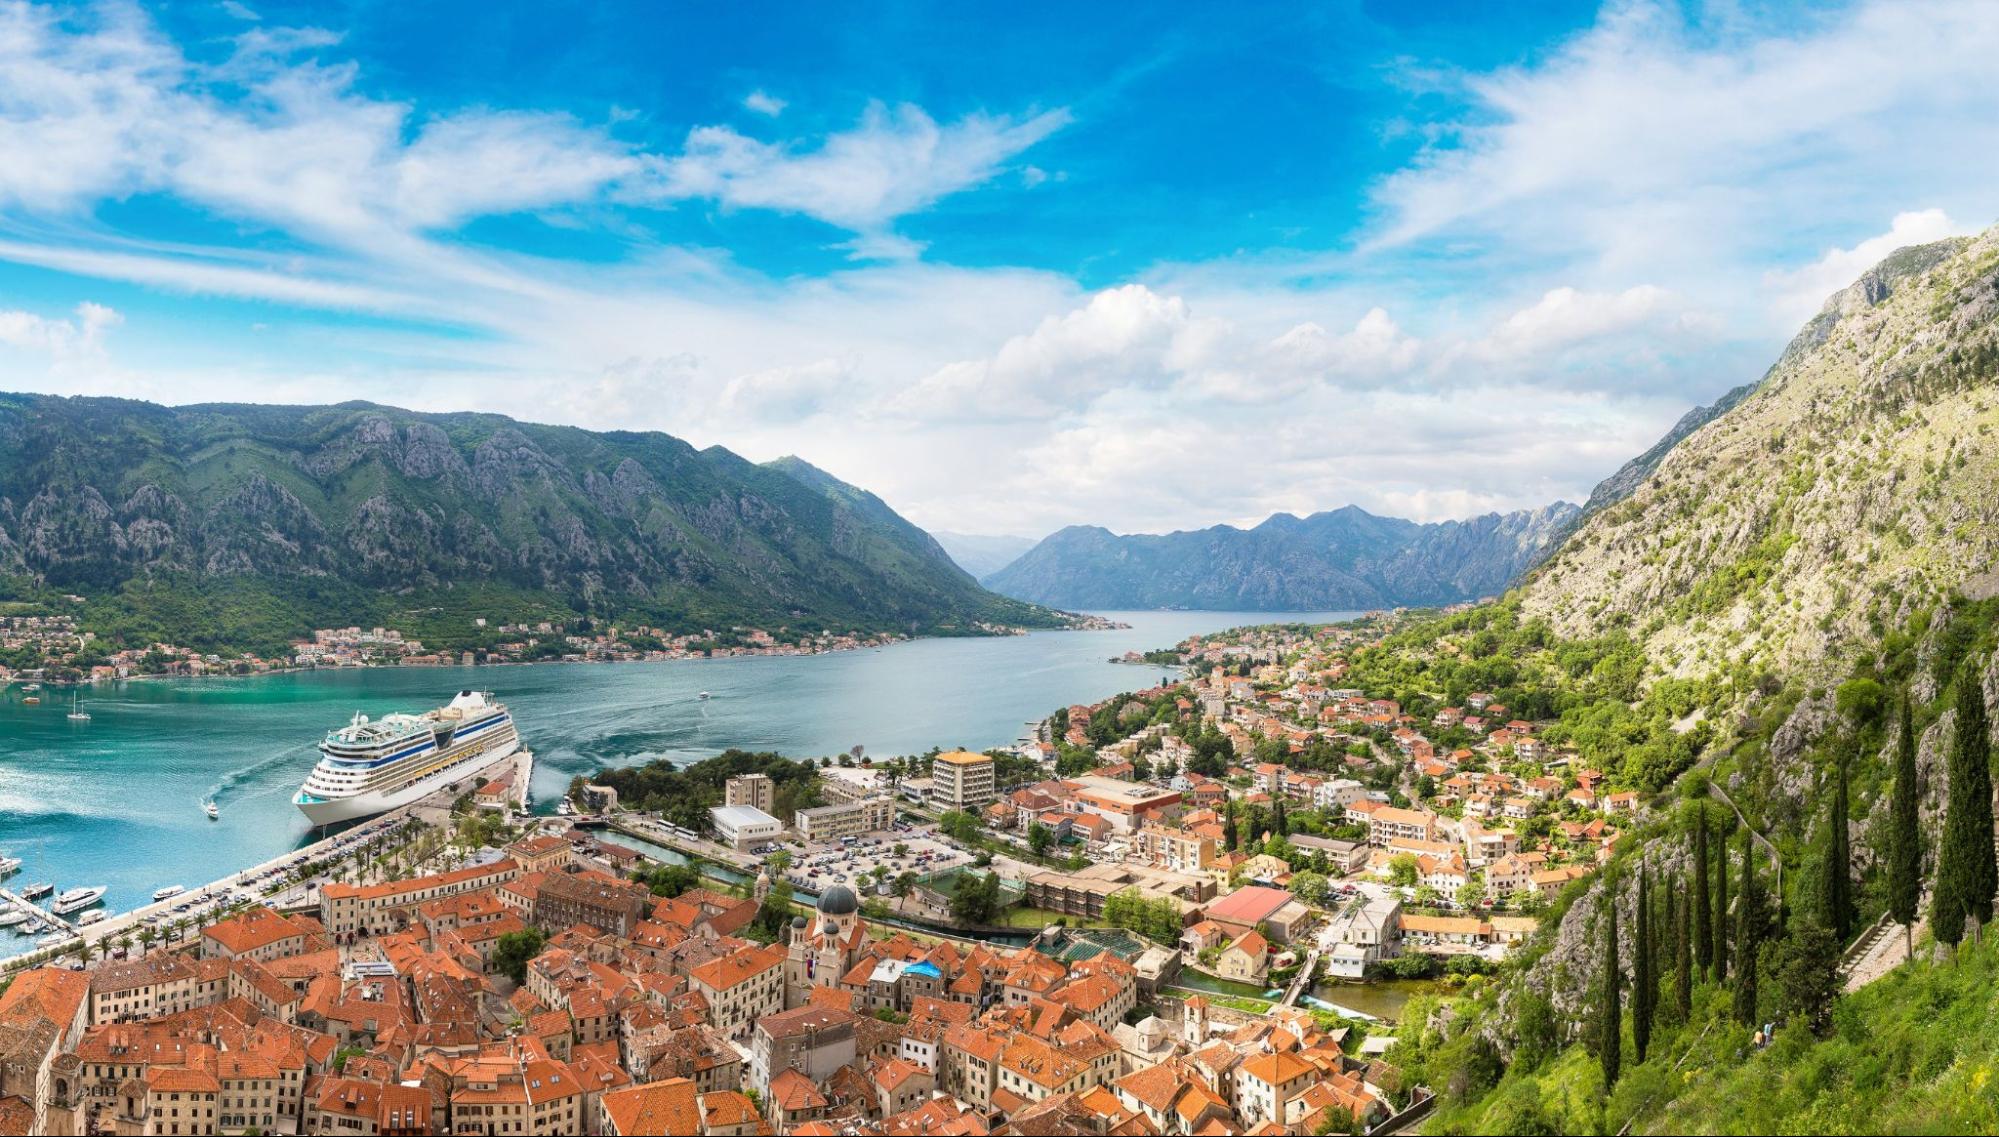 Bay of Kotor with birds-eye view. The town of Kotor, Muo, Prcanj, Tivat. View of the mountains, sea, clouds